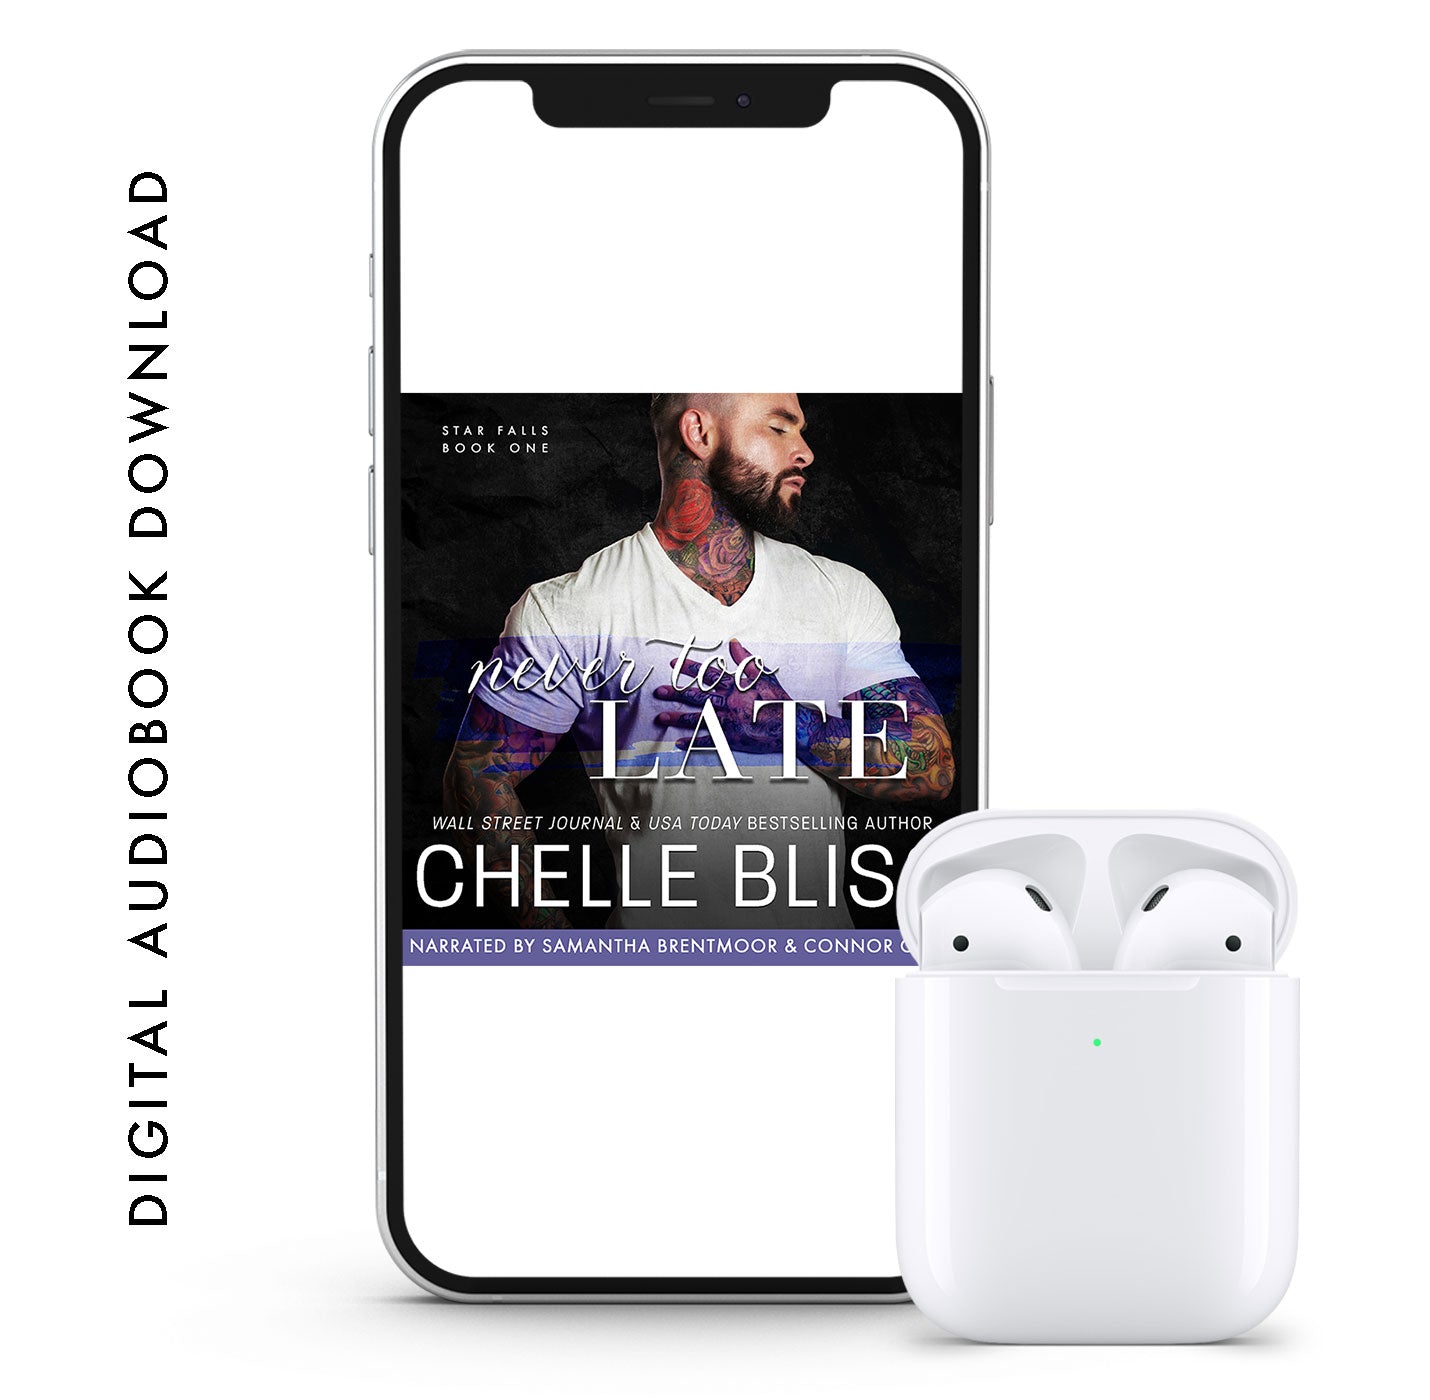 never too late audiobook by chelle bliss man in white t-shirt 